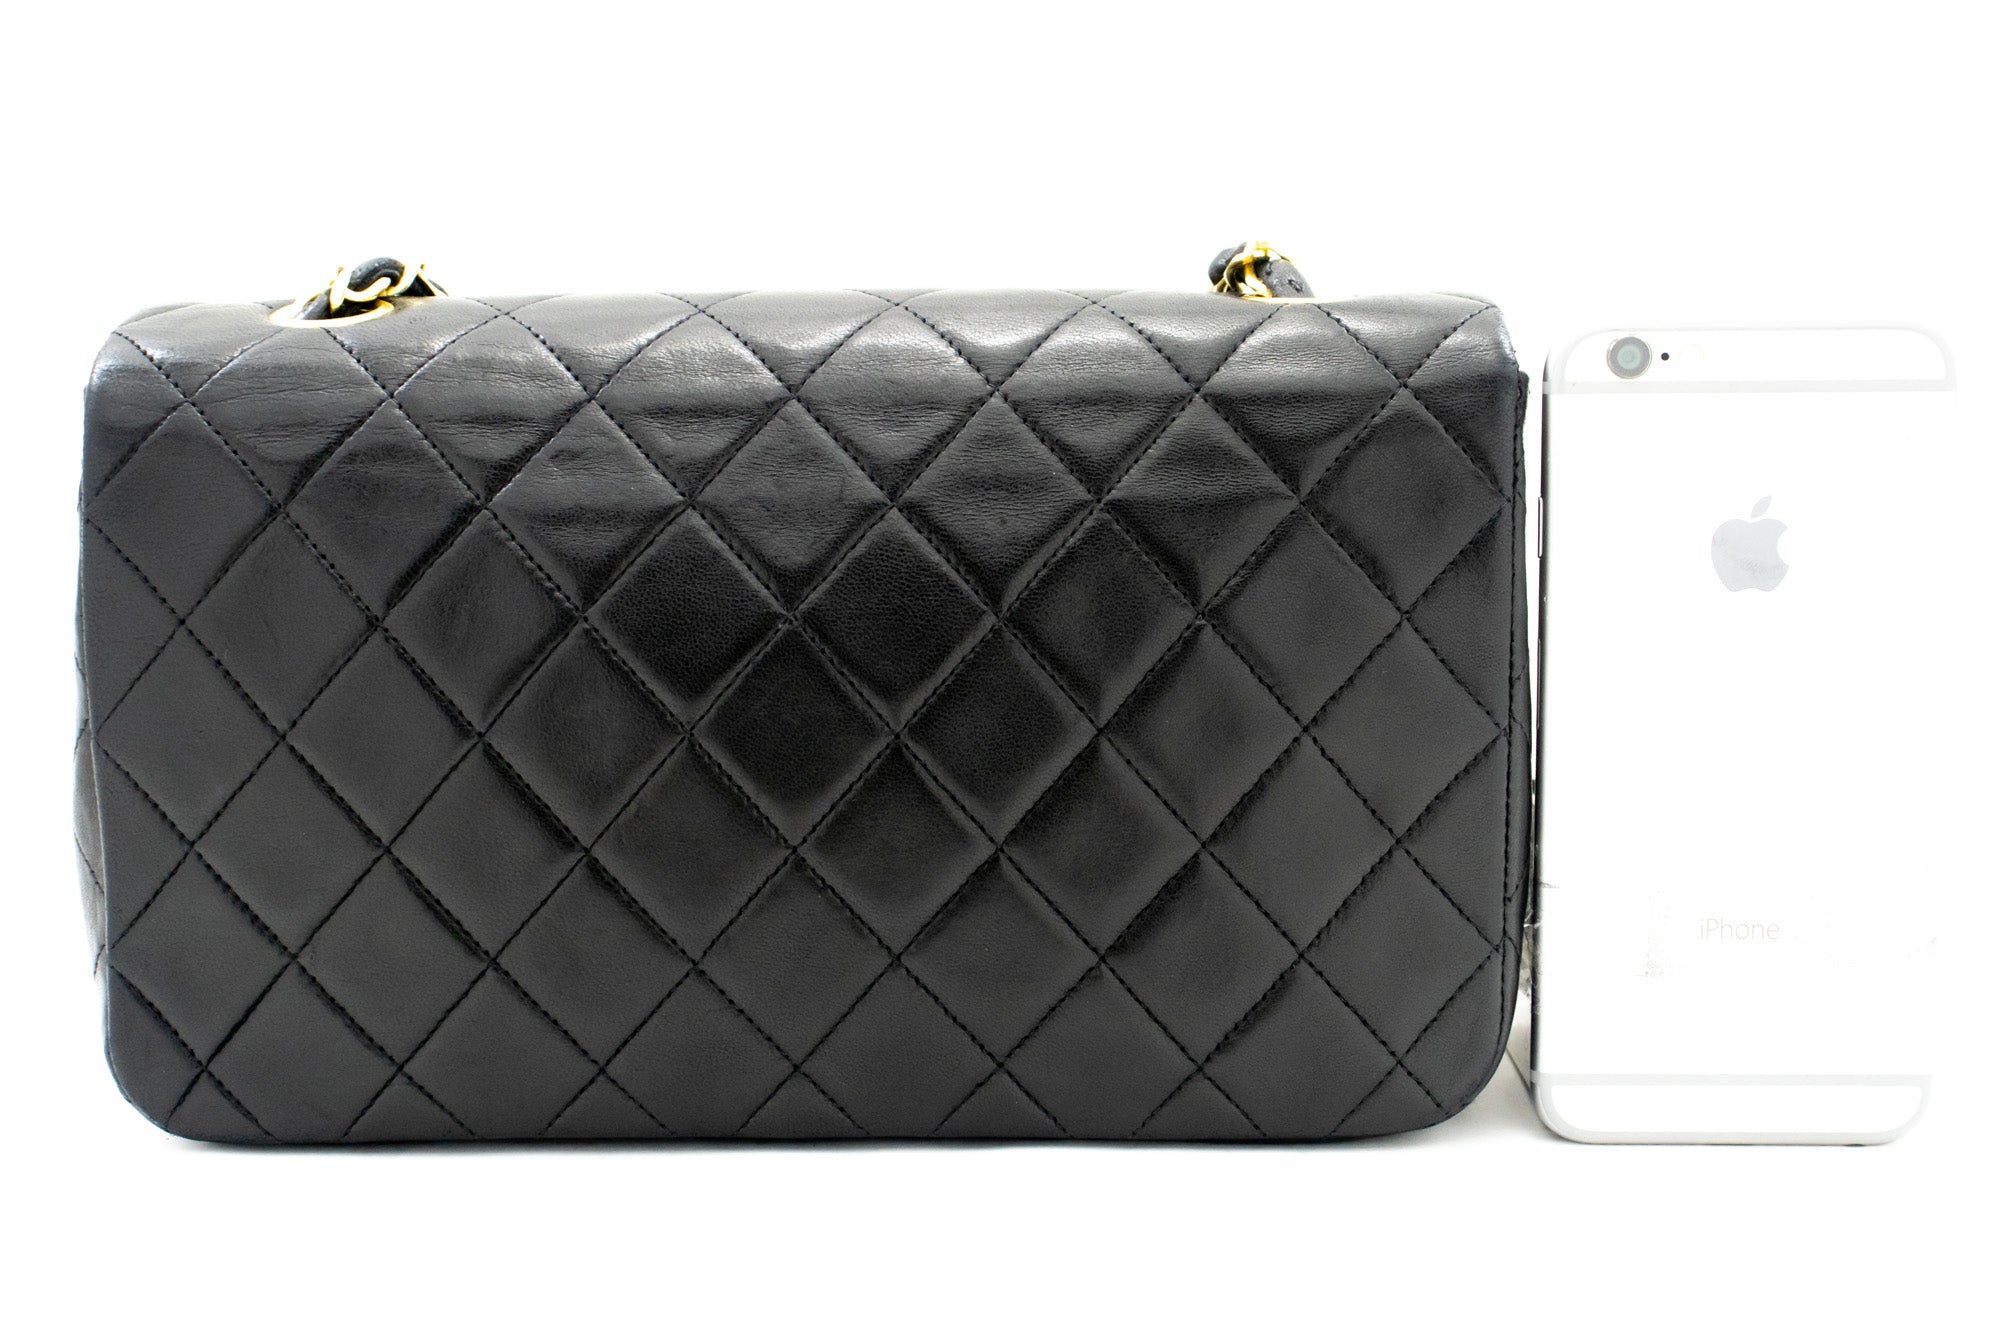 CHANEL Full Flap Chain Shoulder Bag Black Quilted Lambskin Leather L49 –  hannari-shop